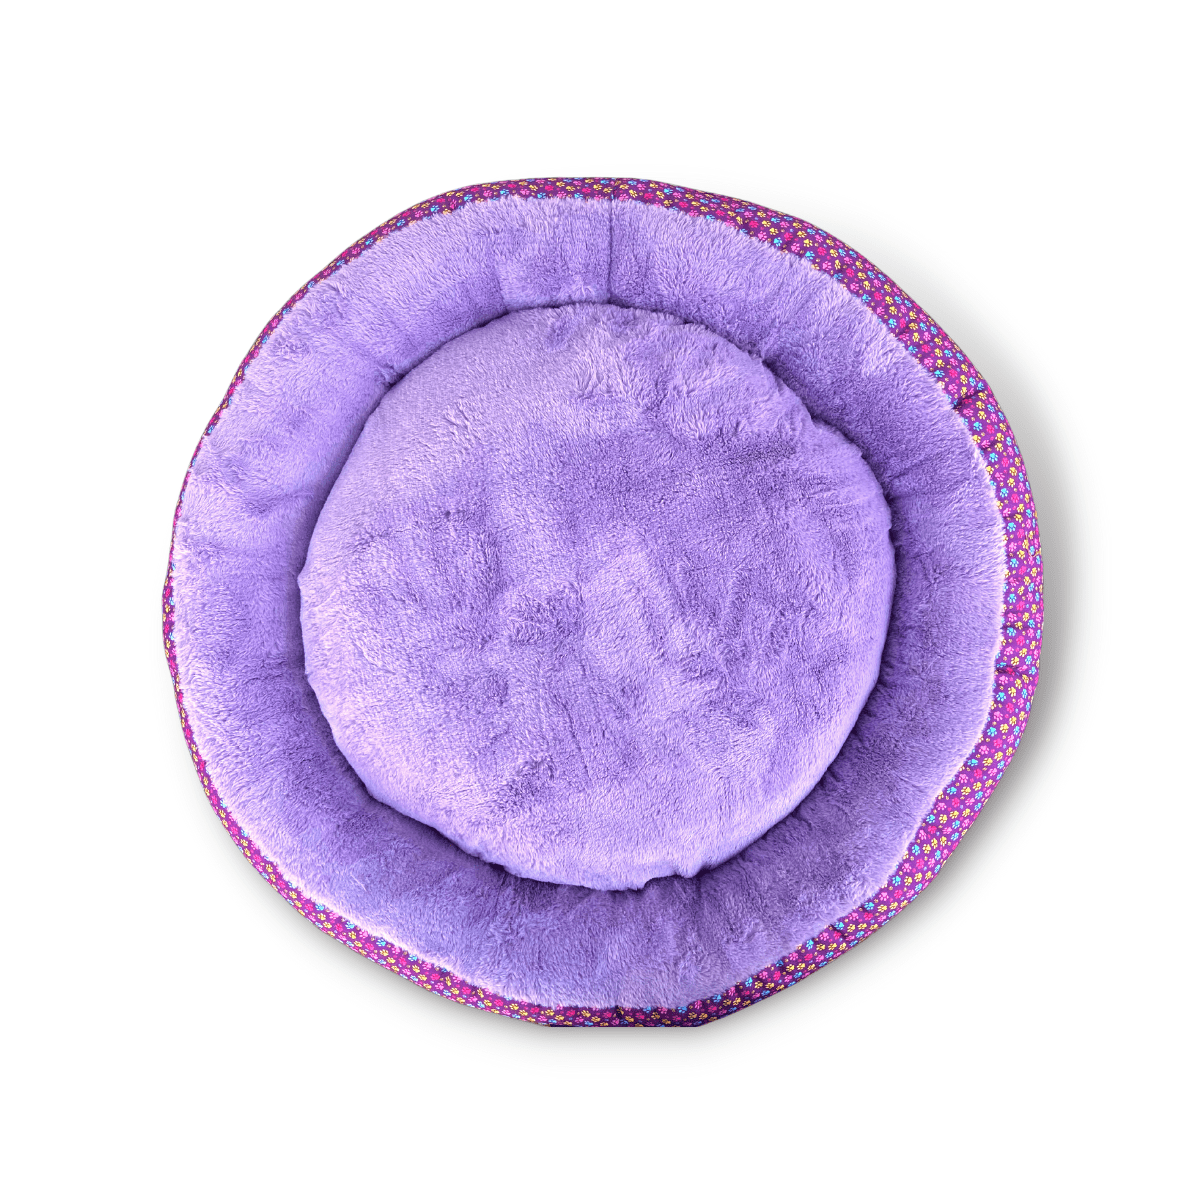 Caninkart Paws Premium Round Beds for Dogs and Cats (Lavender)